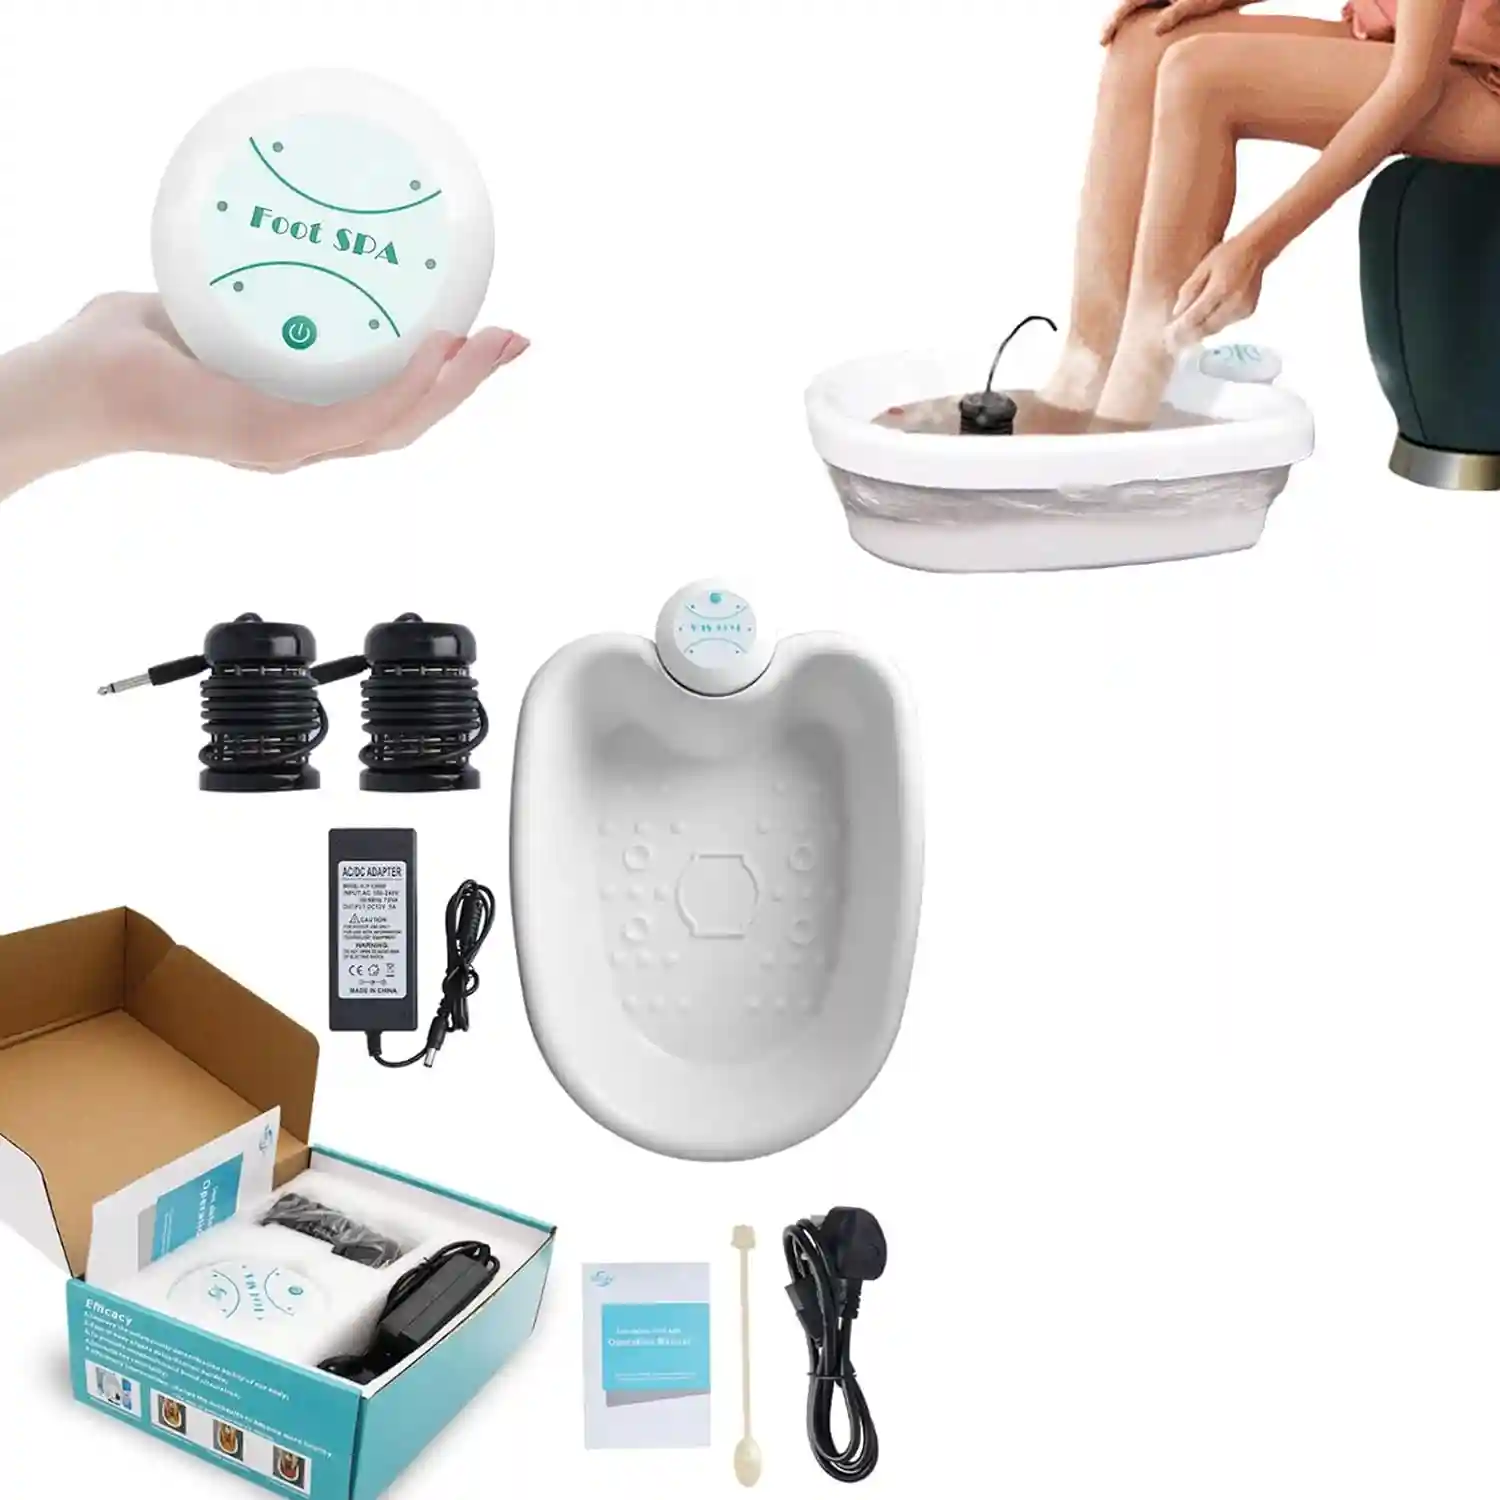 You are currently viewing Healifeco Foot Spa Reviews: Is Healifeco Foot Spa Legit?